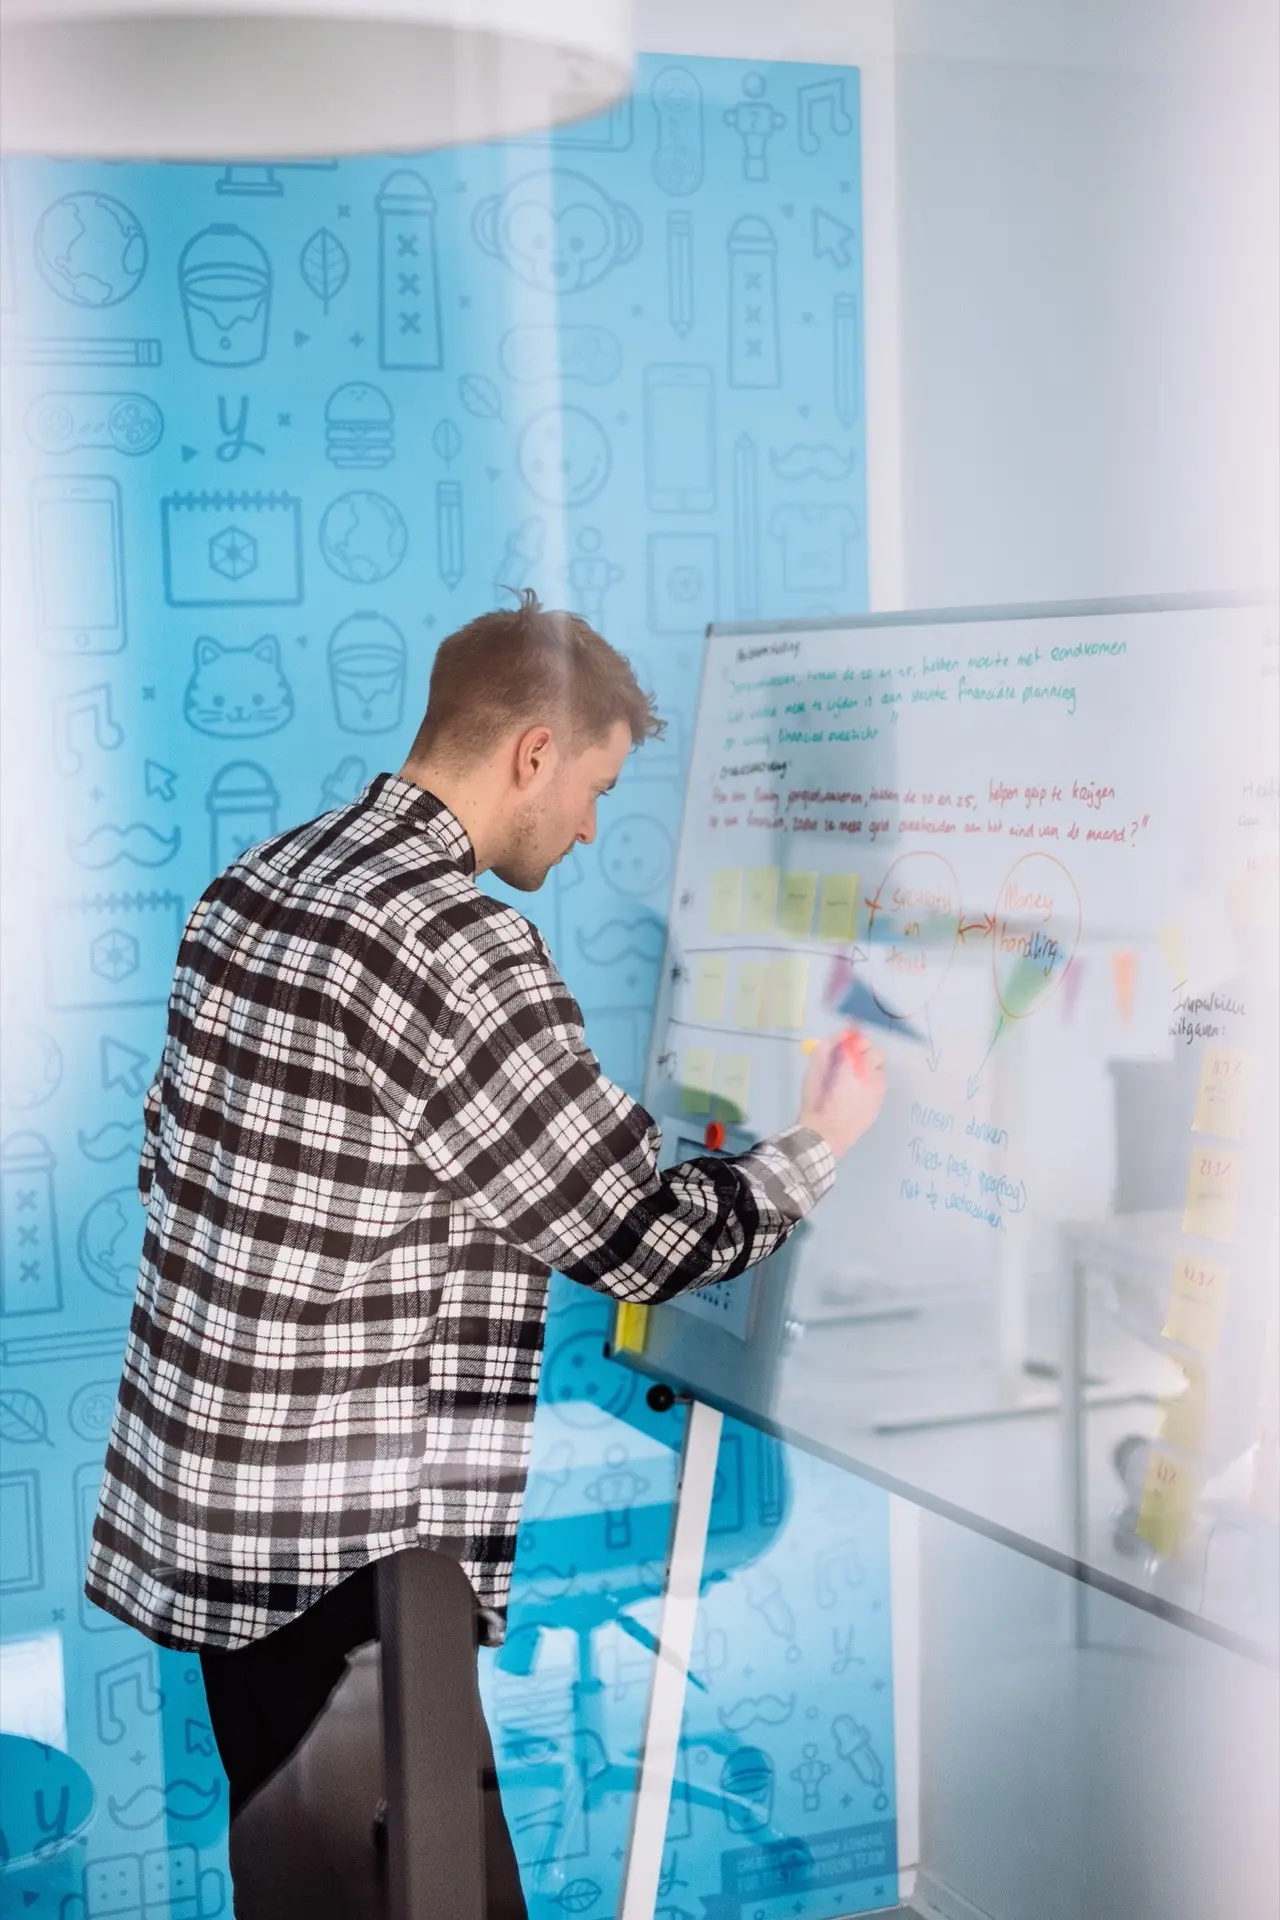 UX Designer writing on a whiteboard